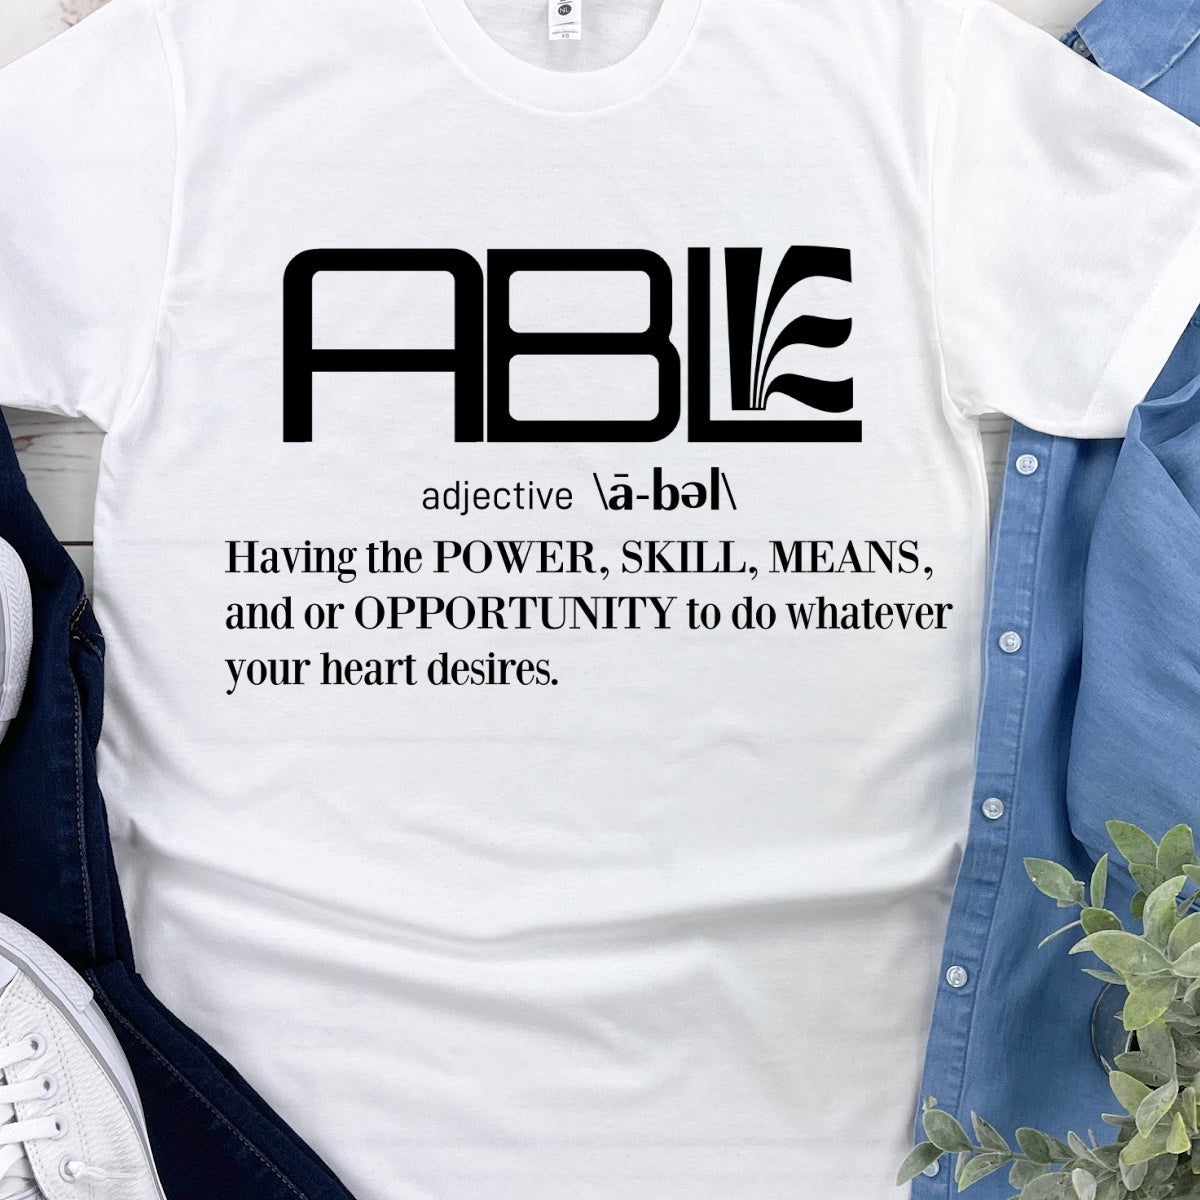 ABLE Definition T-Shirt